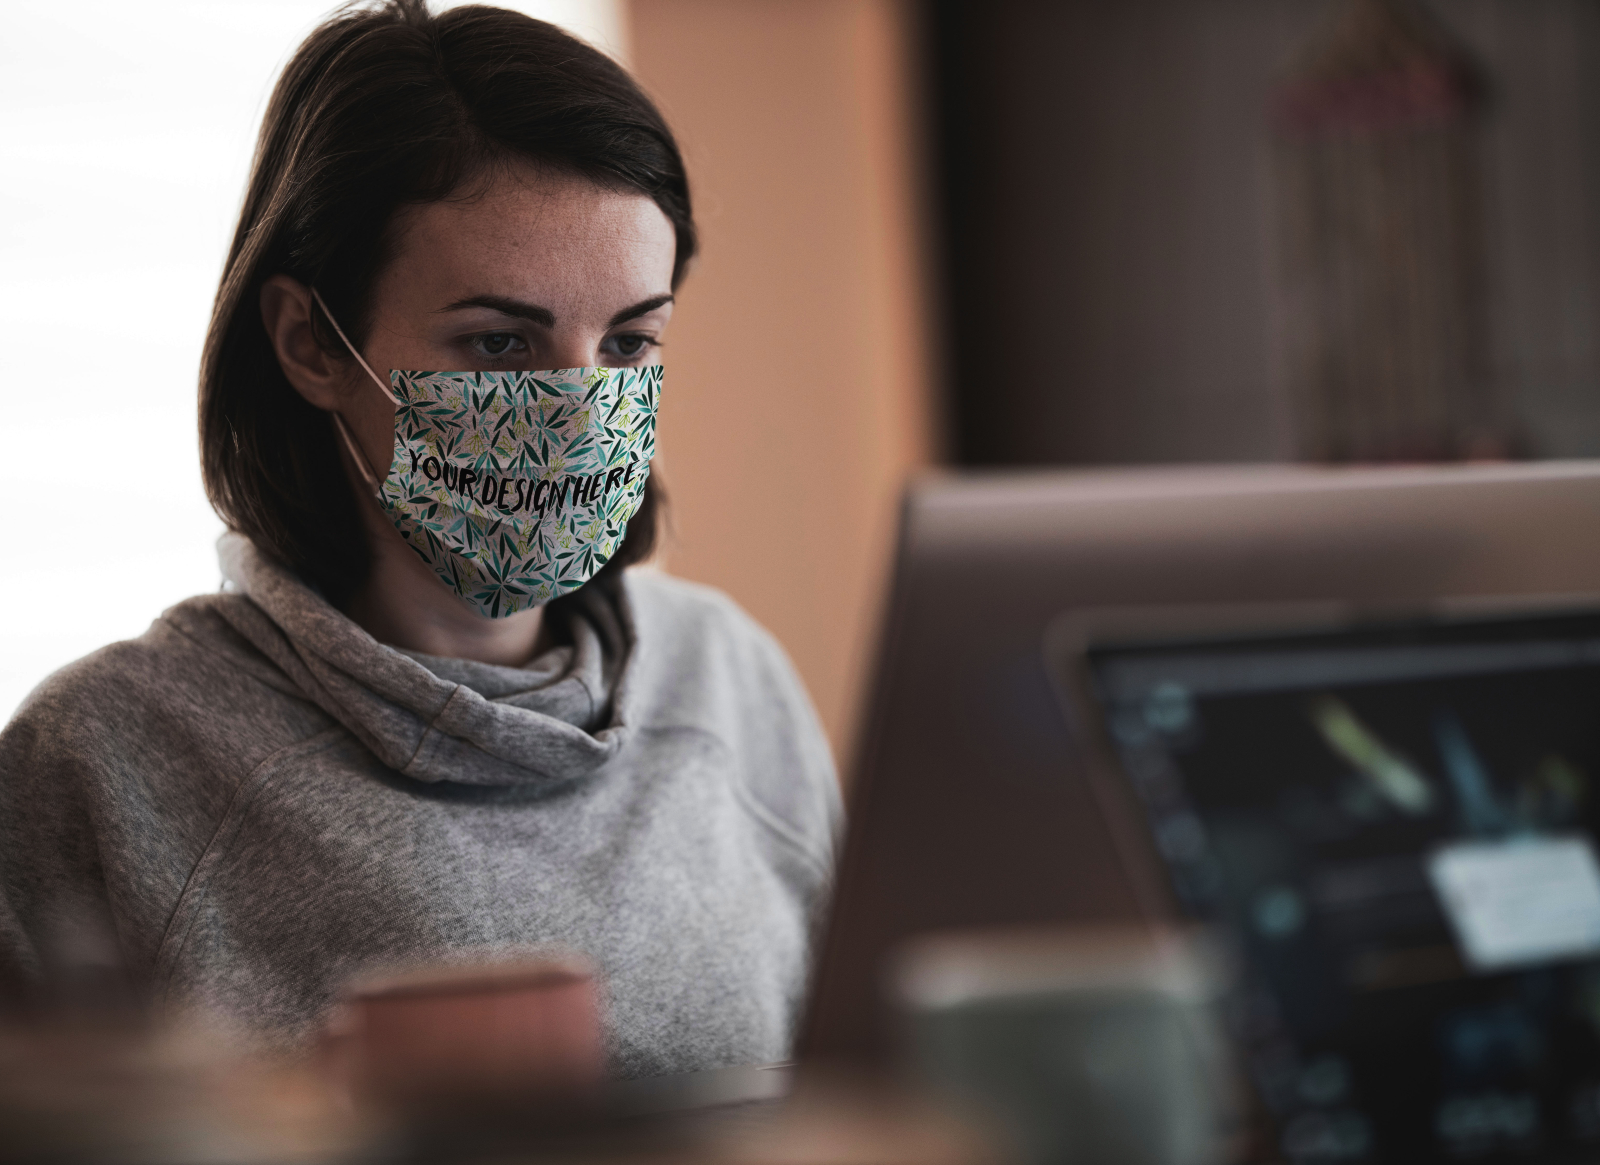 Working in Face Mask Mockup Free PSD by Roman Kups on ...